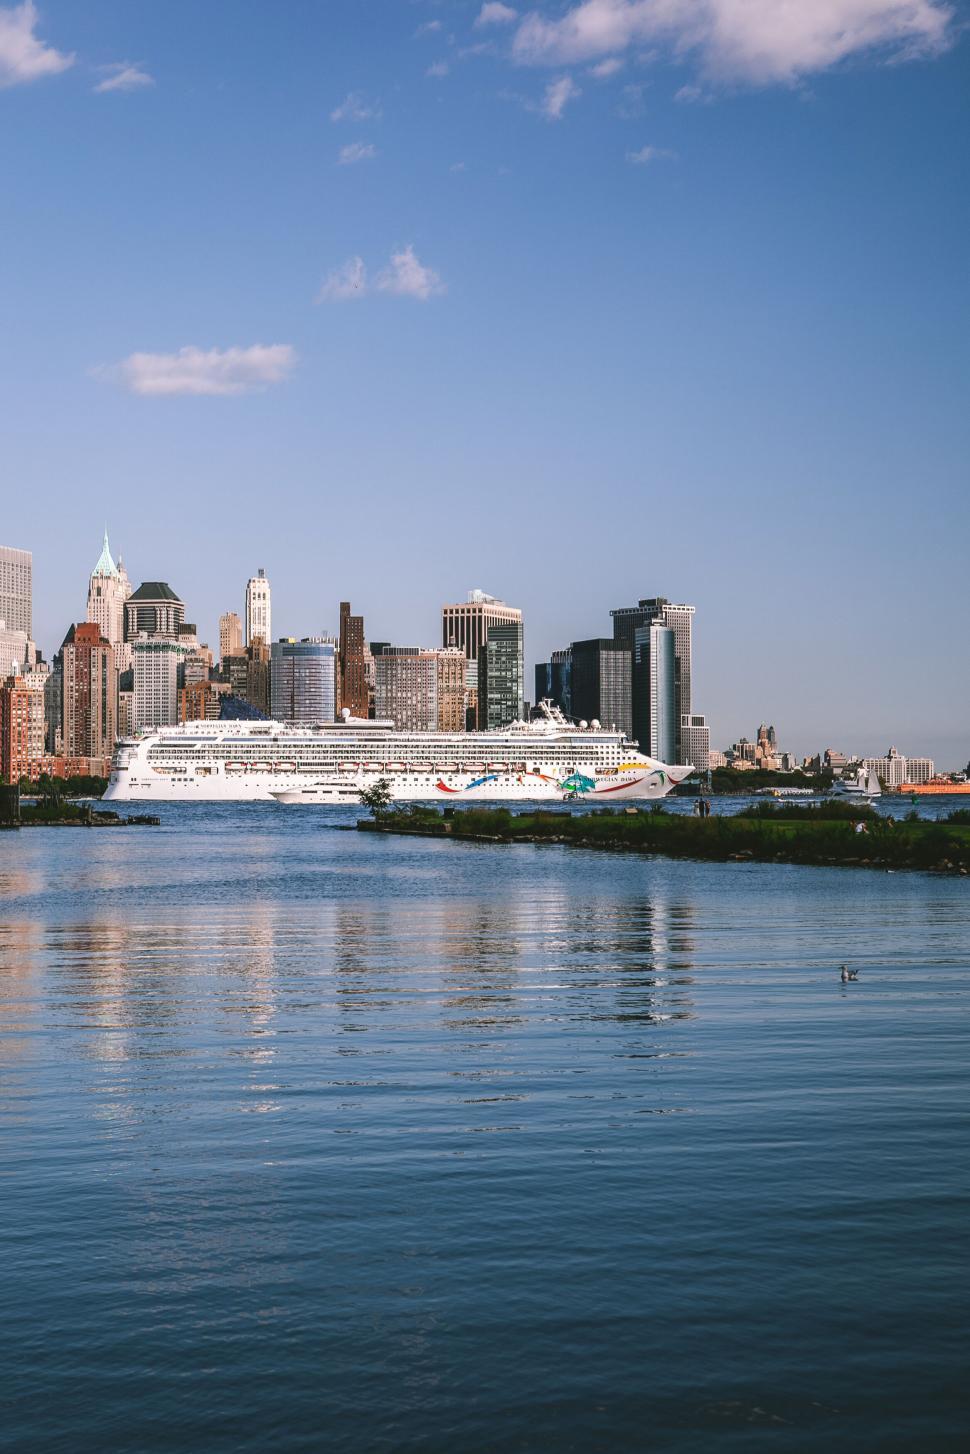 Free Image of City skyline with a cruise ship docked 